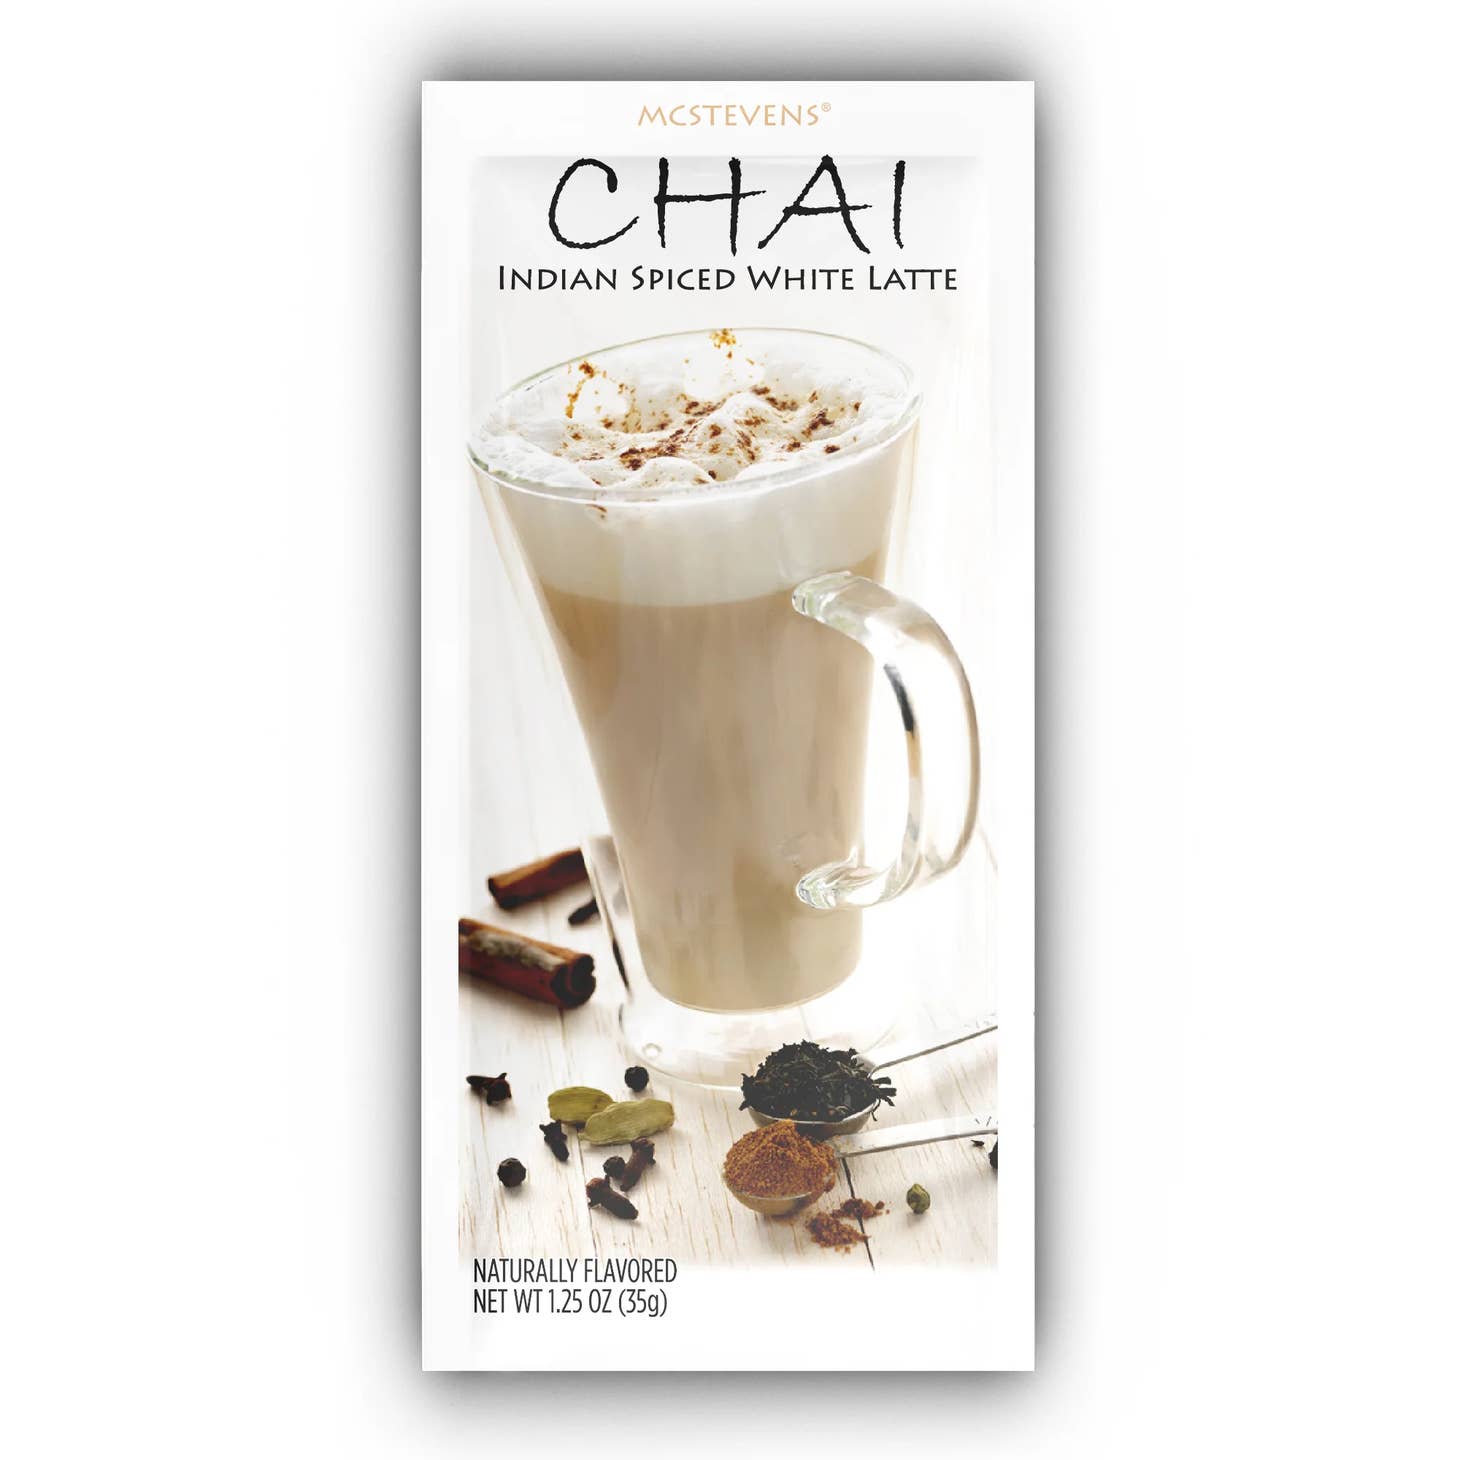 a packet of chai indian spiced white latte with the image of a cup of chai surrounded by spices printed on it.